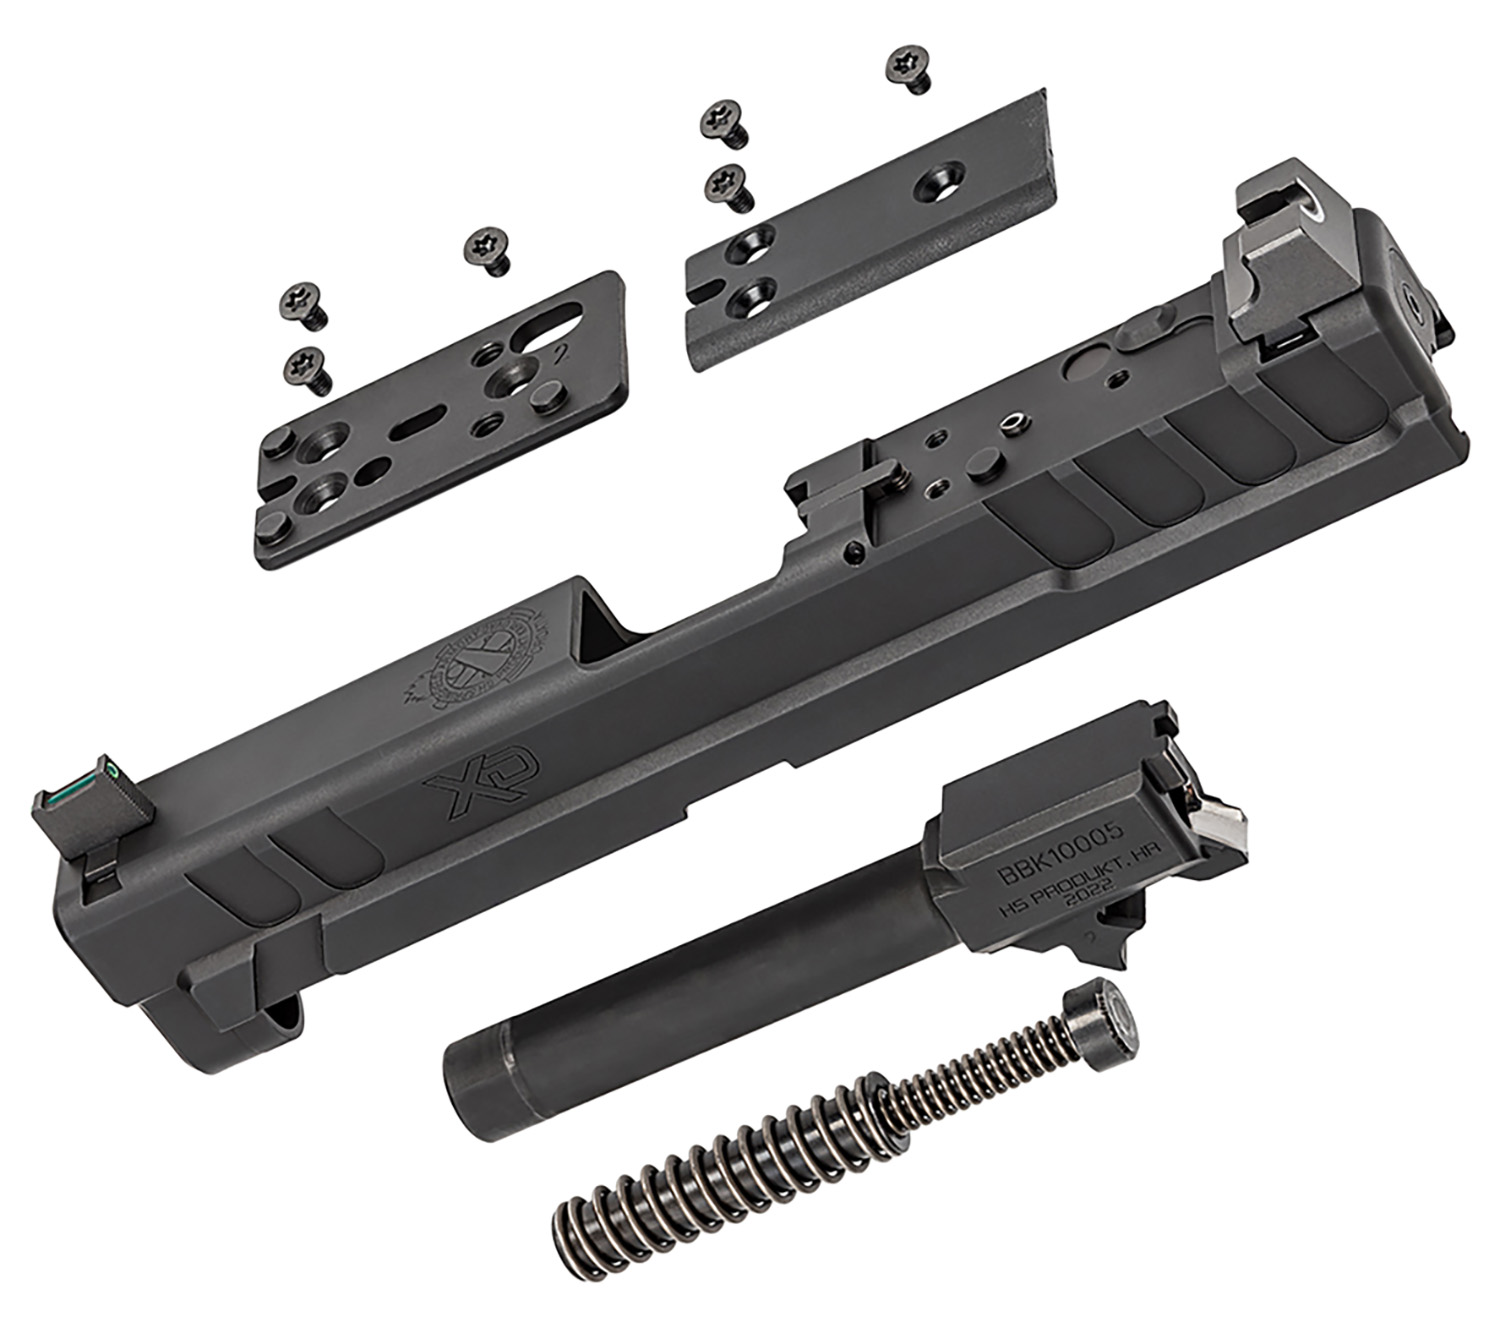 SPRINGFIELD XD OSP SLIDE AND BARREL ASSEMBLY - for sale